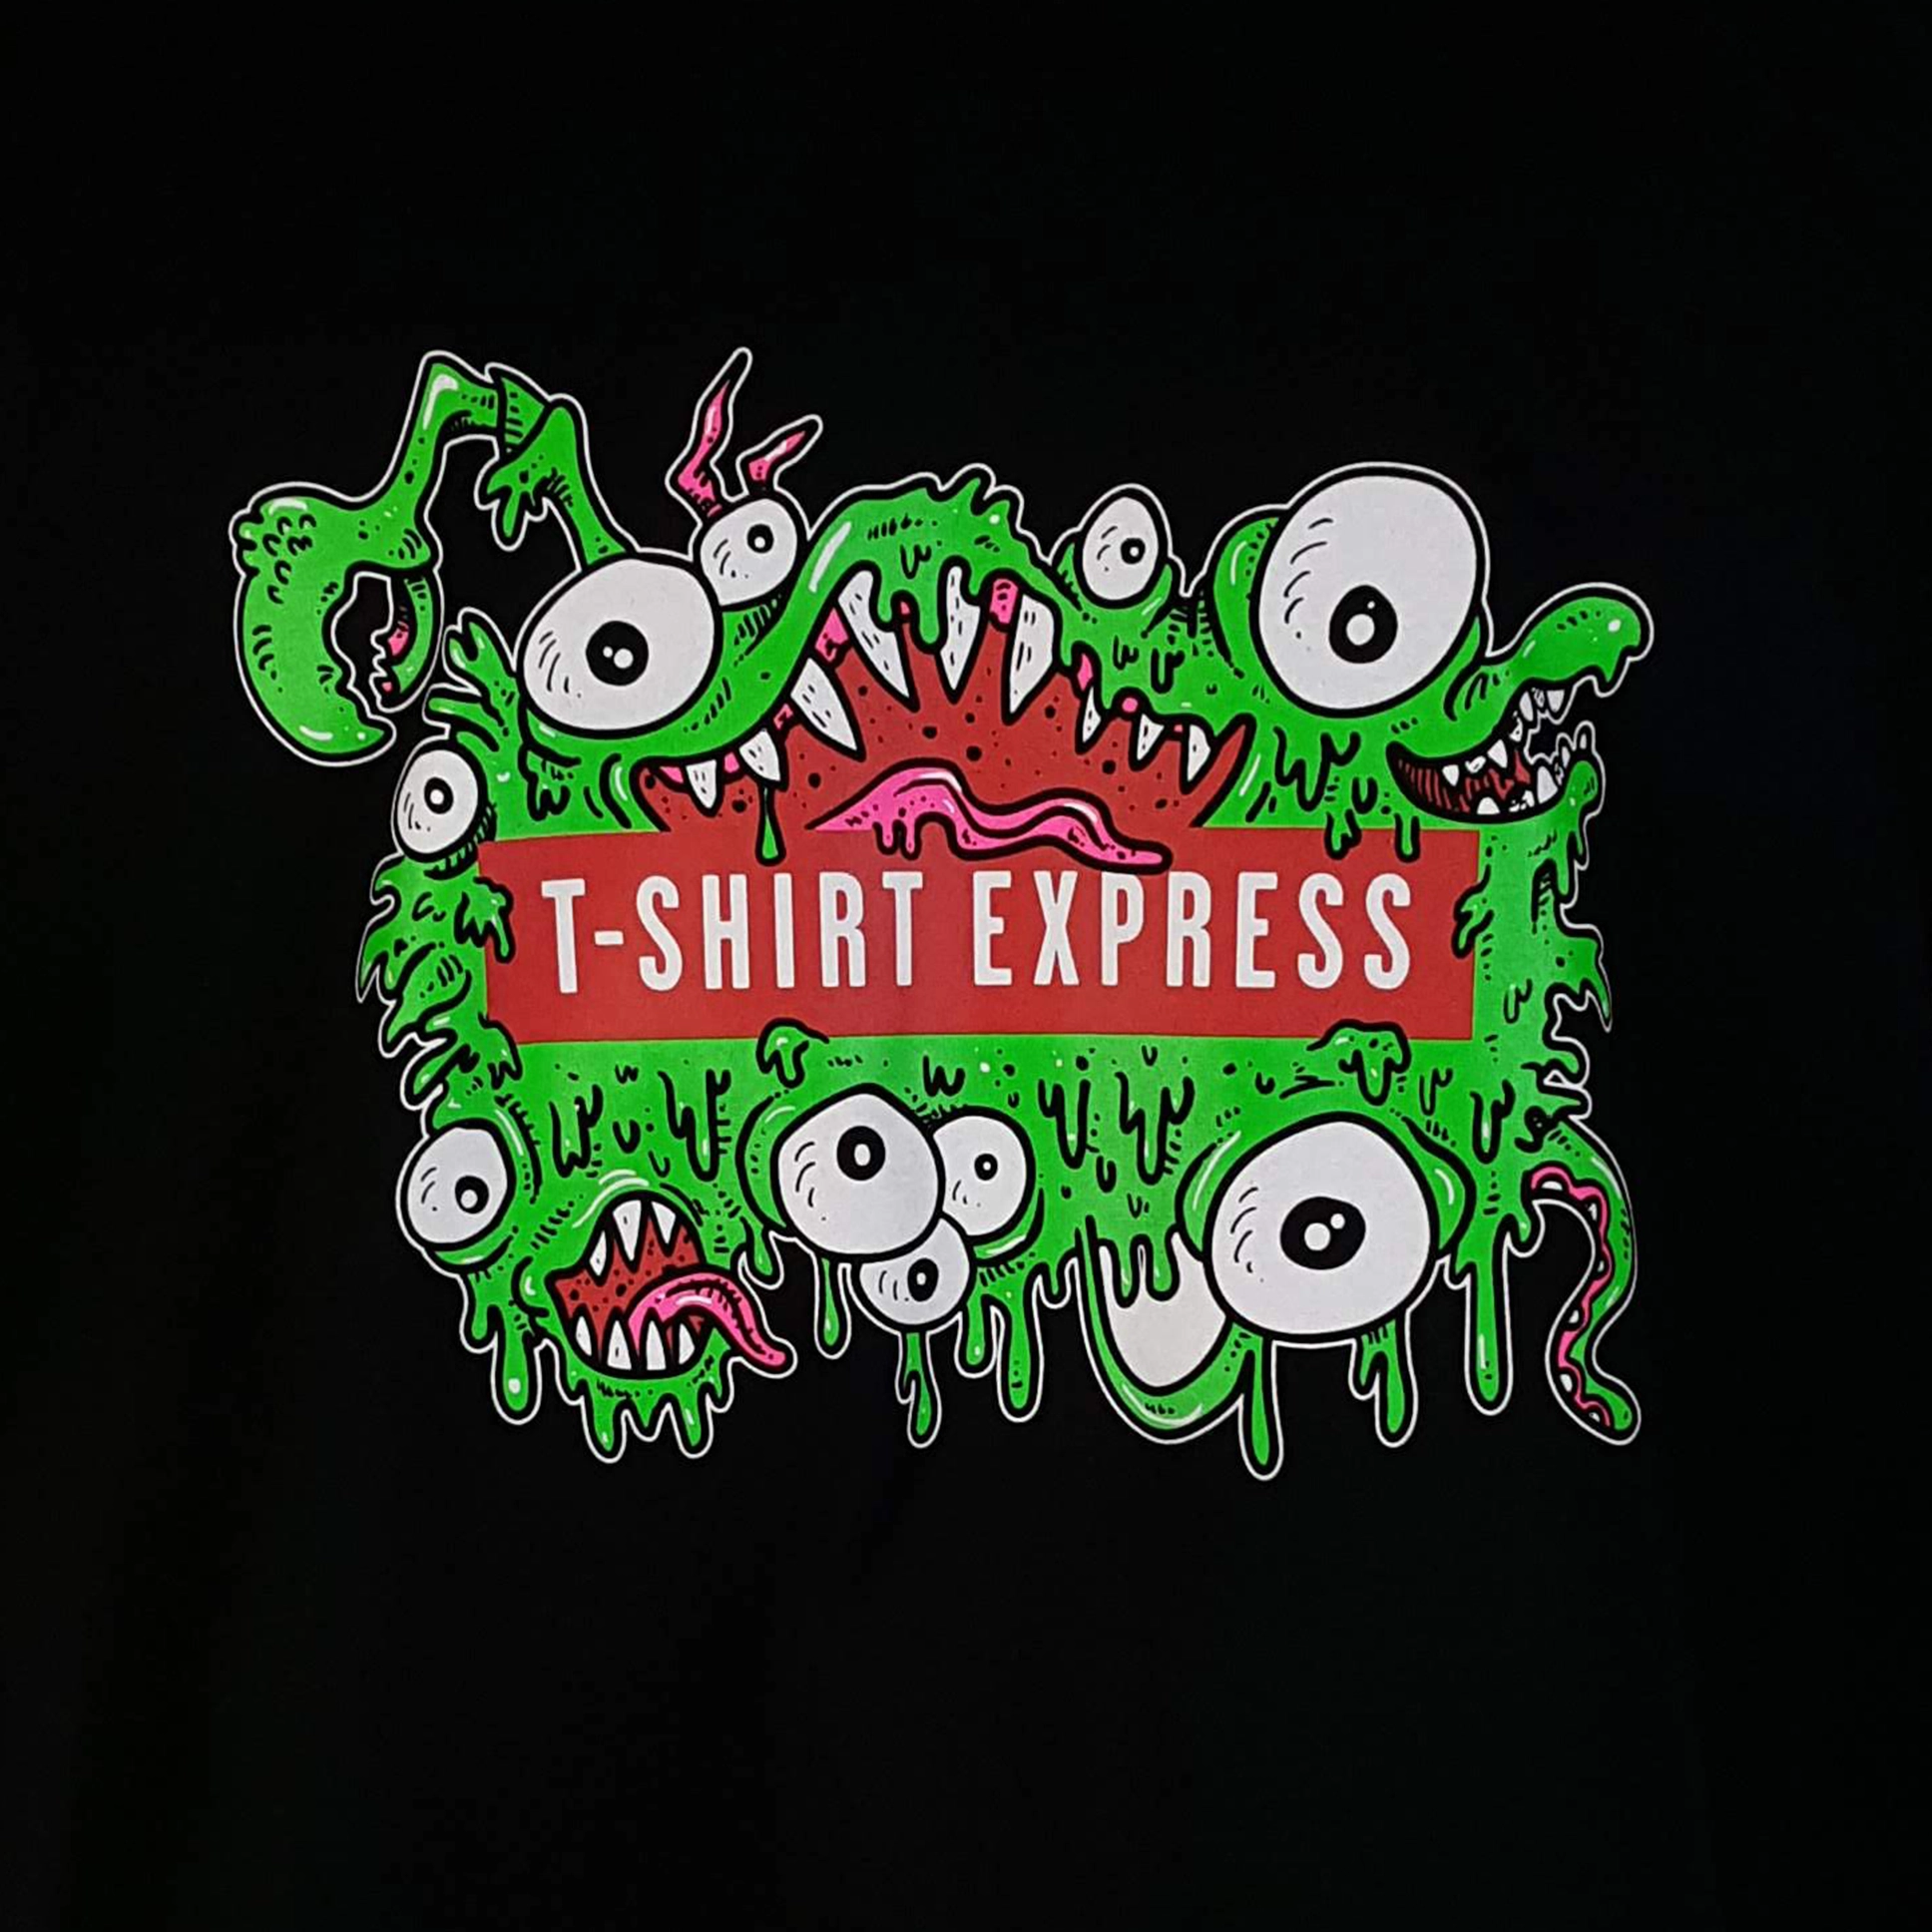 t-shirt express in Franklin ohio